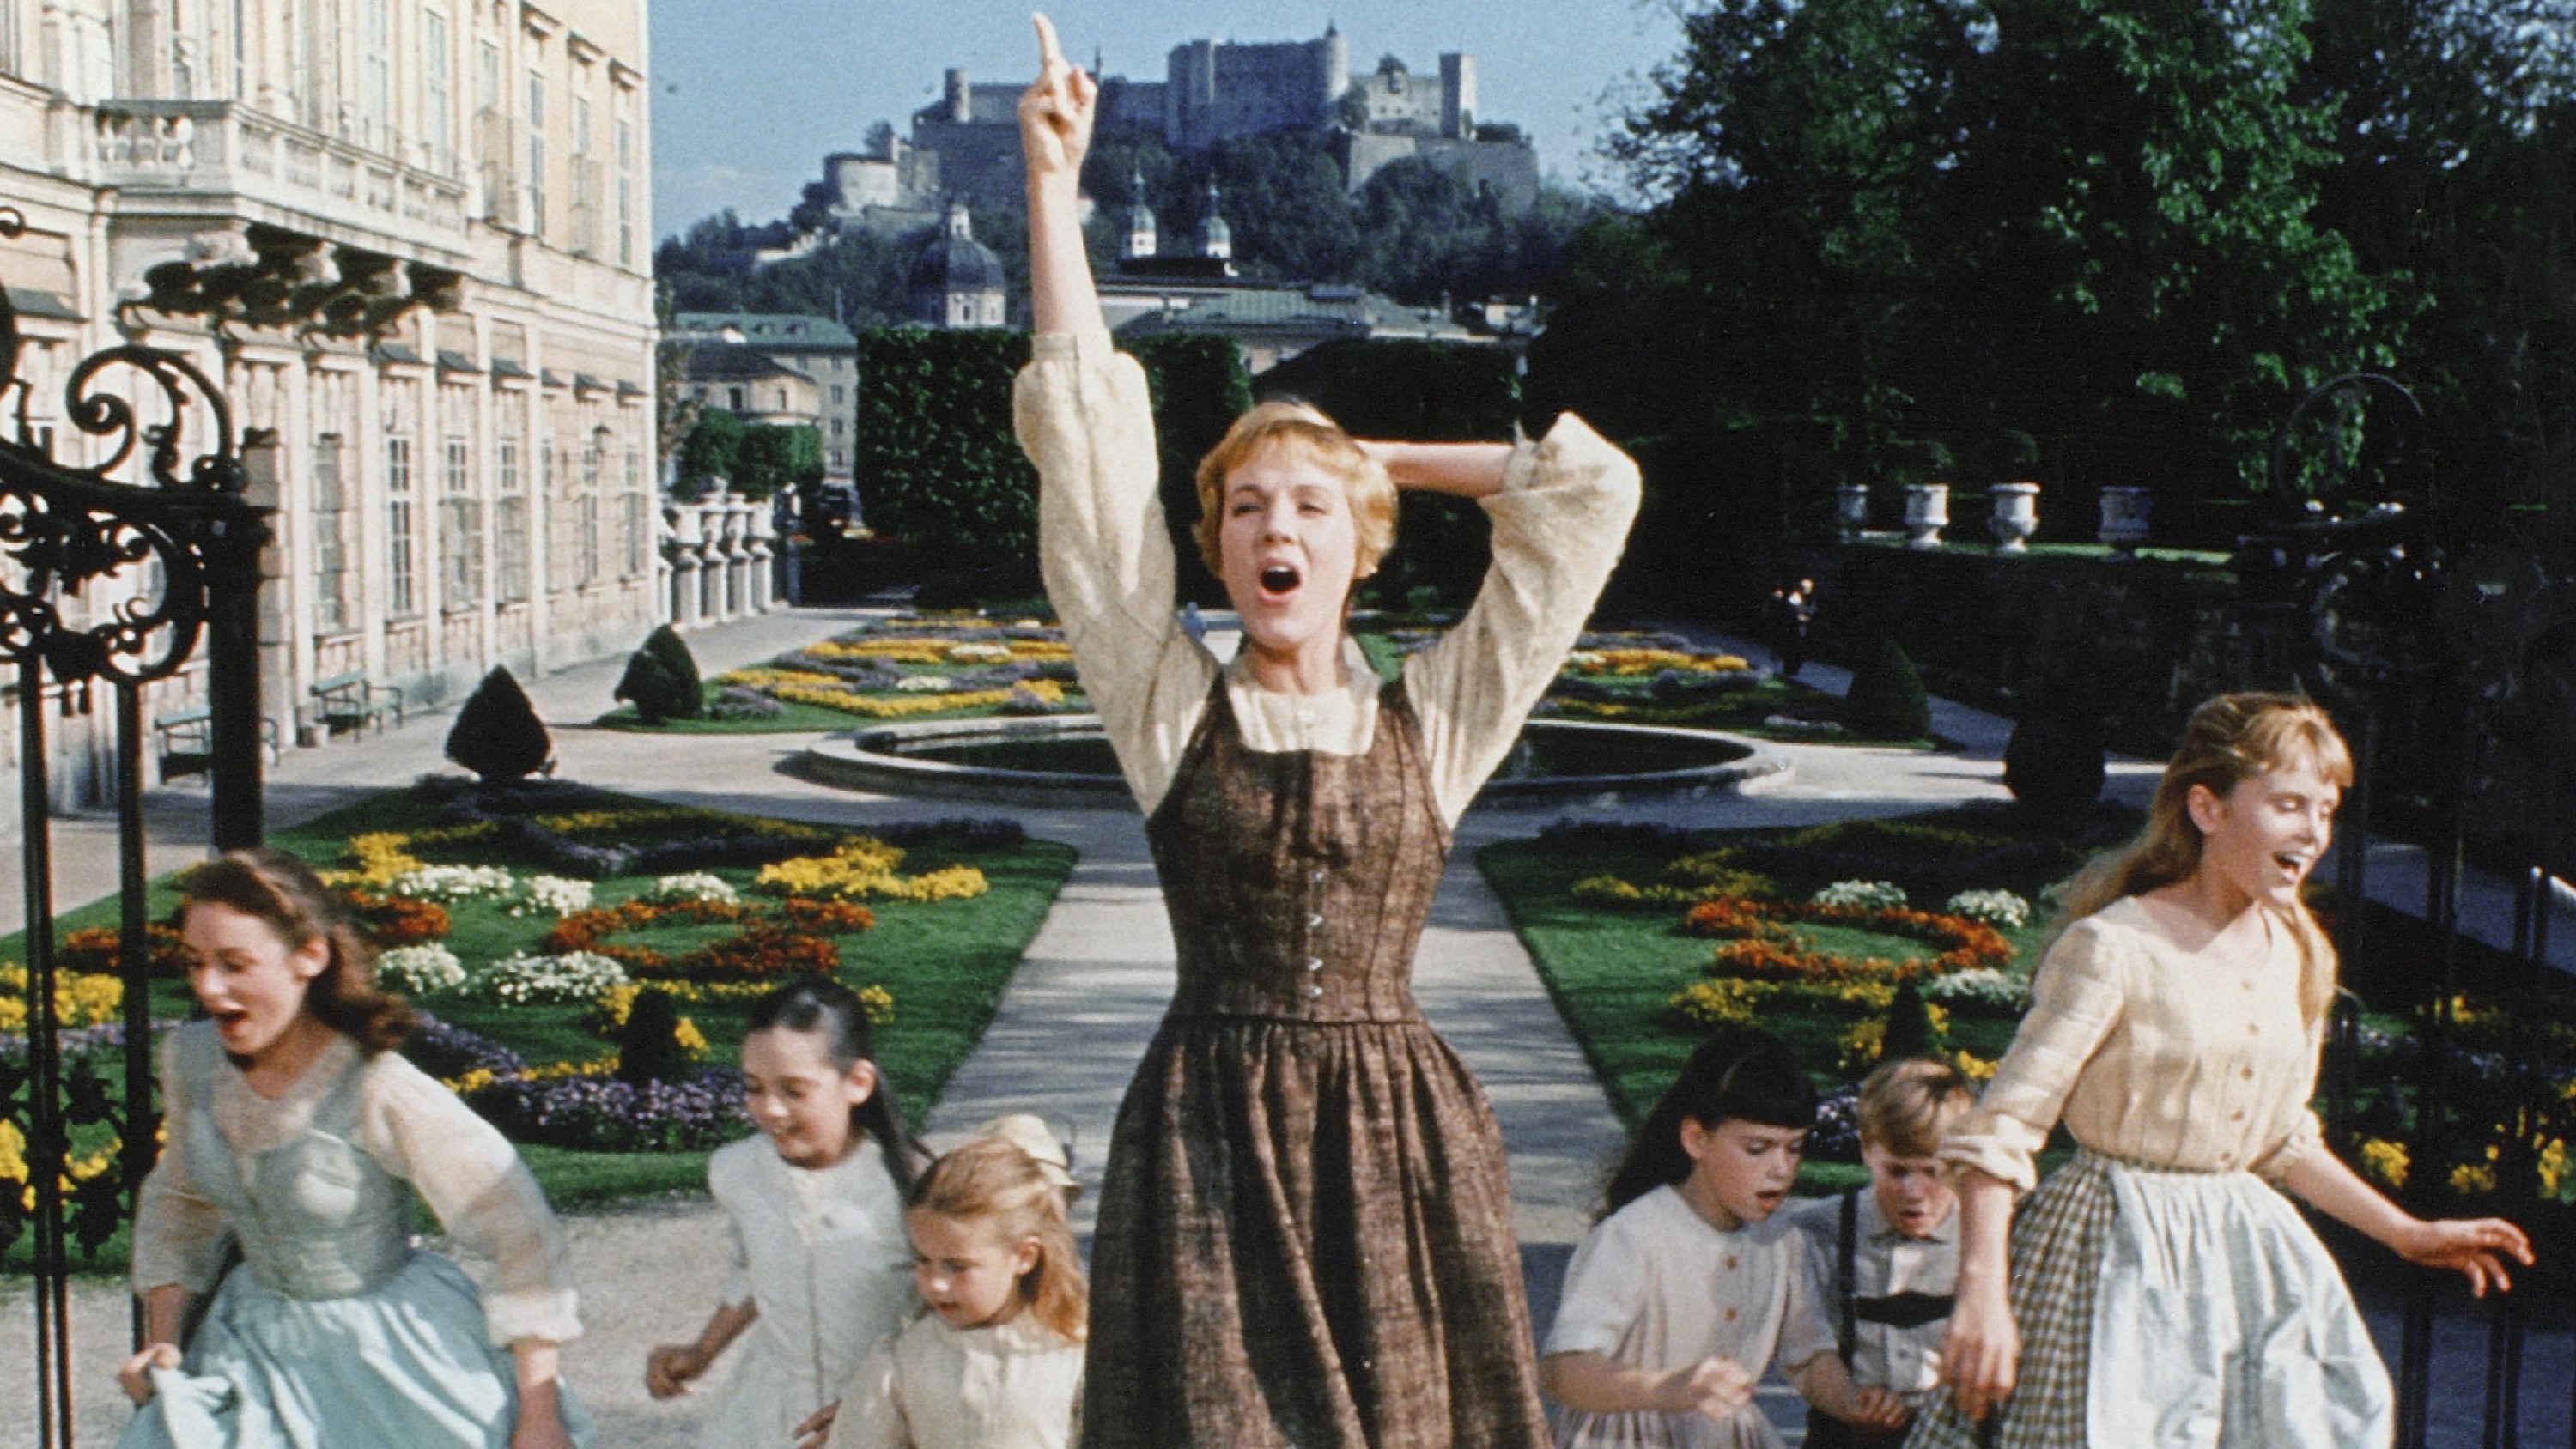 A film guide that looks at The Sound of Music (1965) thumbnail